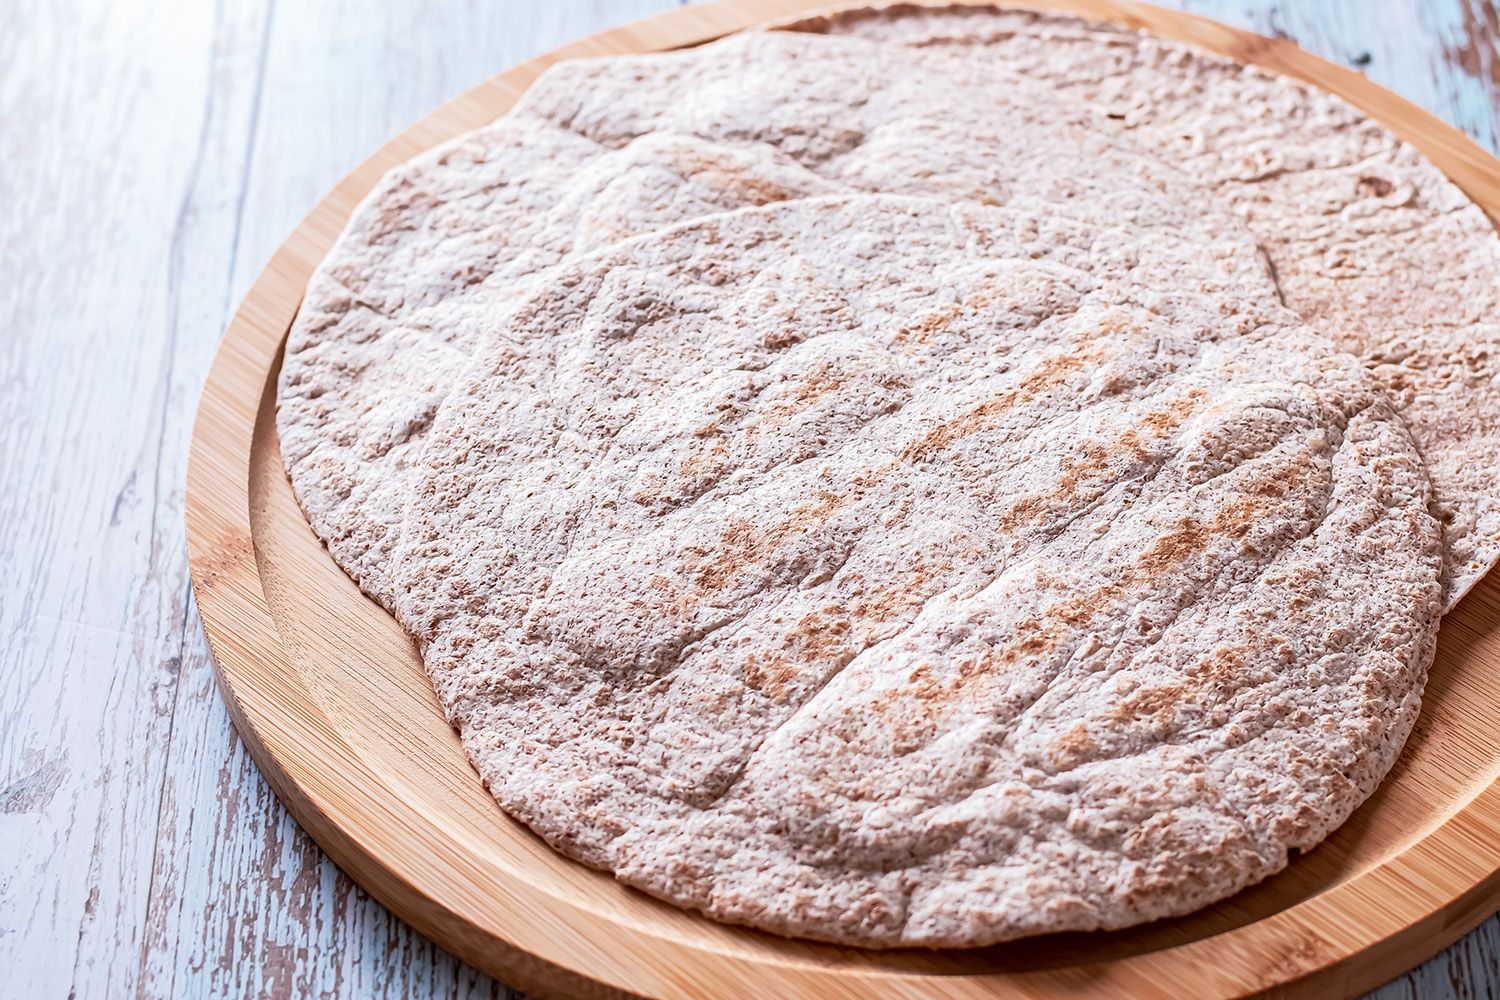 tortillas on a wooden board for making sandwiches, burritos or quesadillas